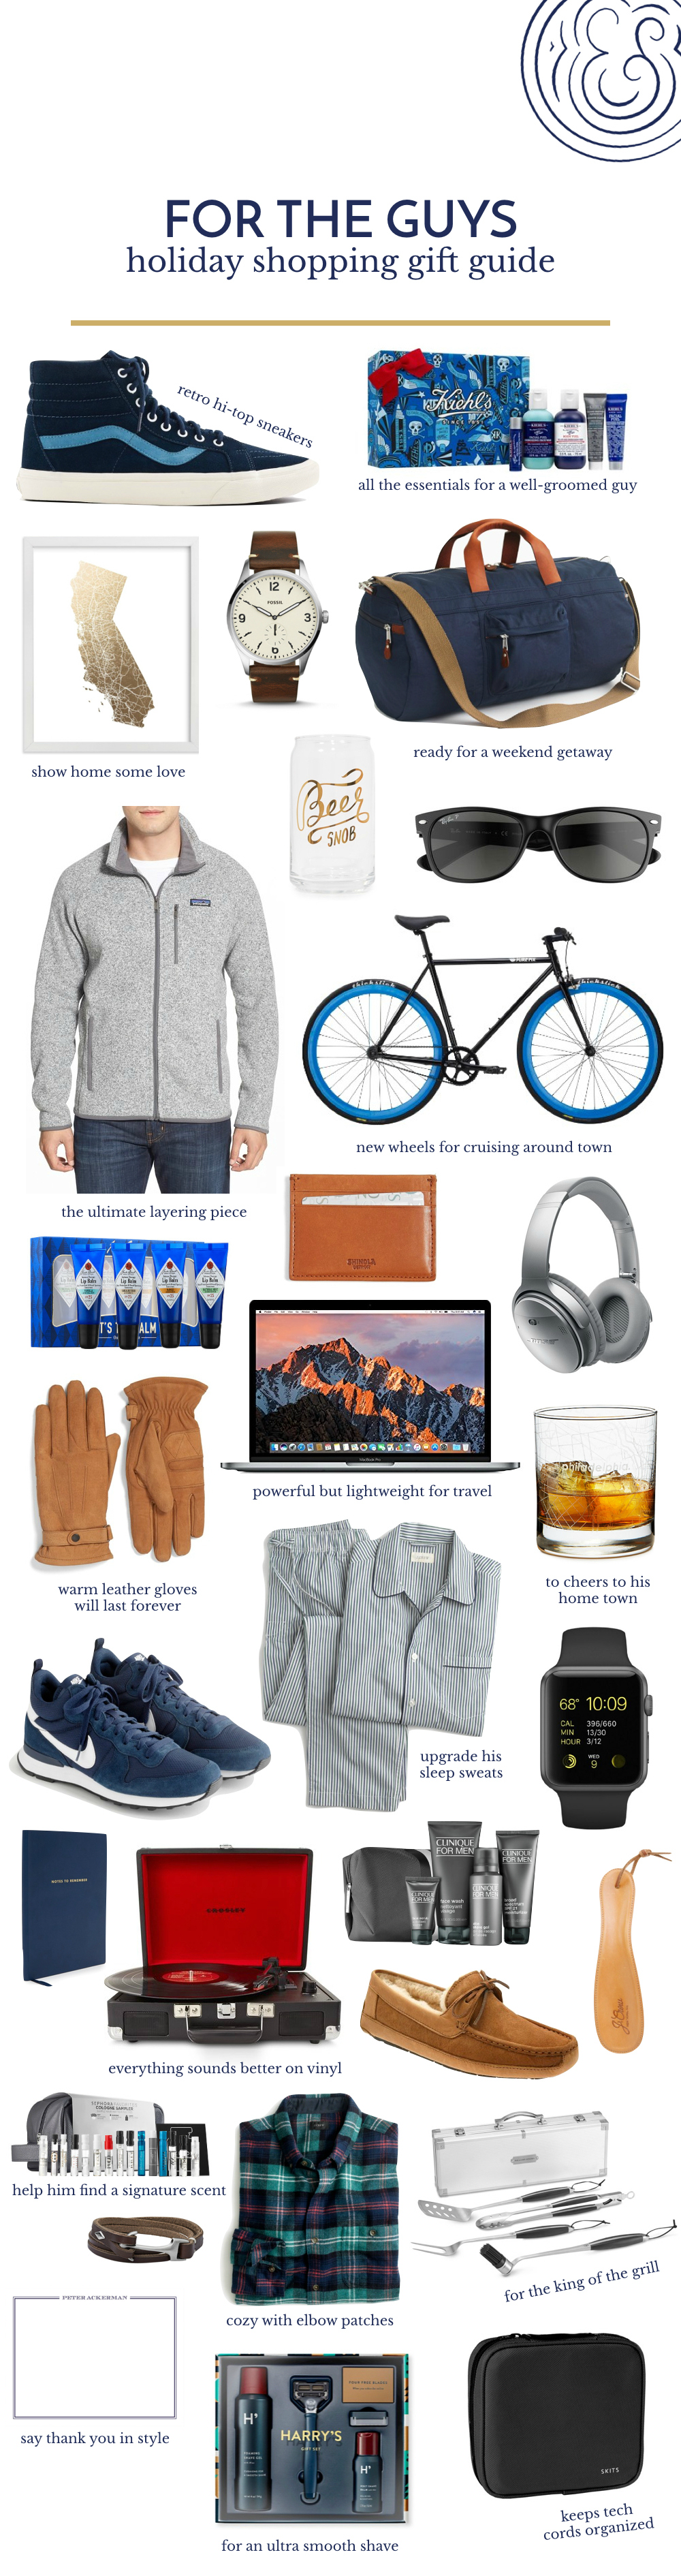 Holiday Gift Ideas for The Guys.